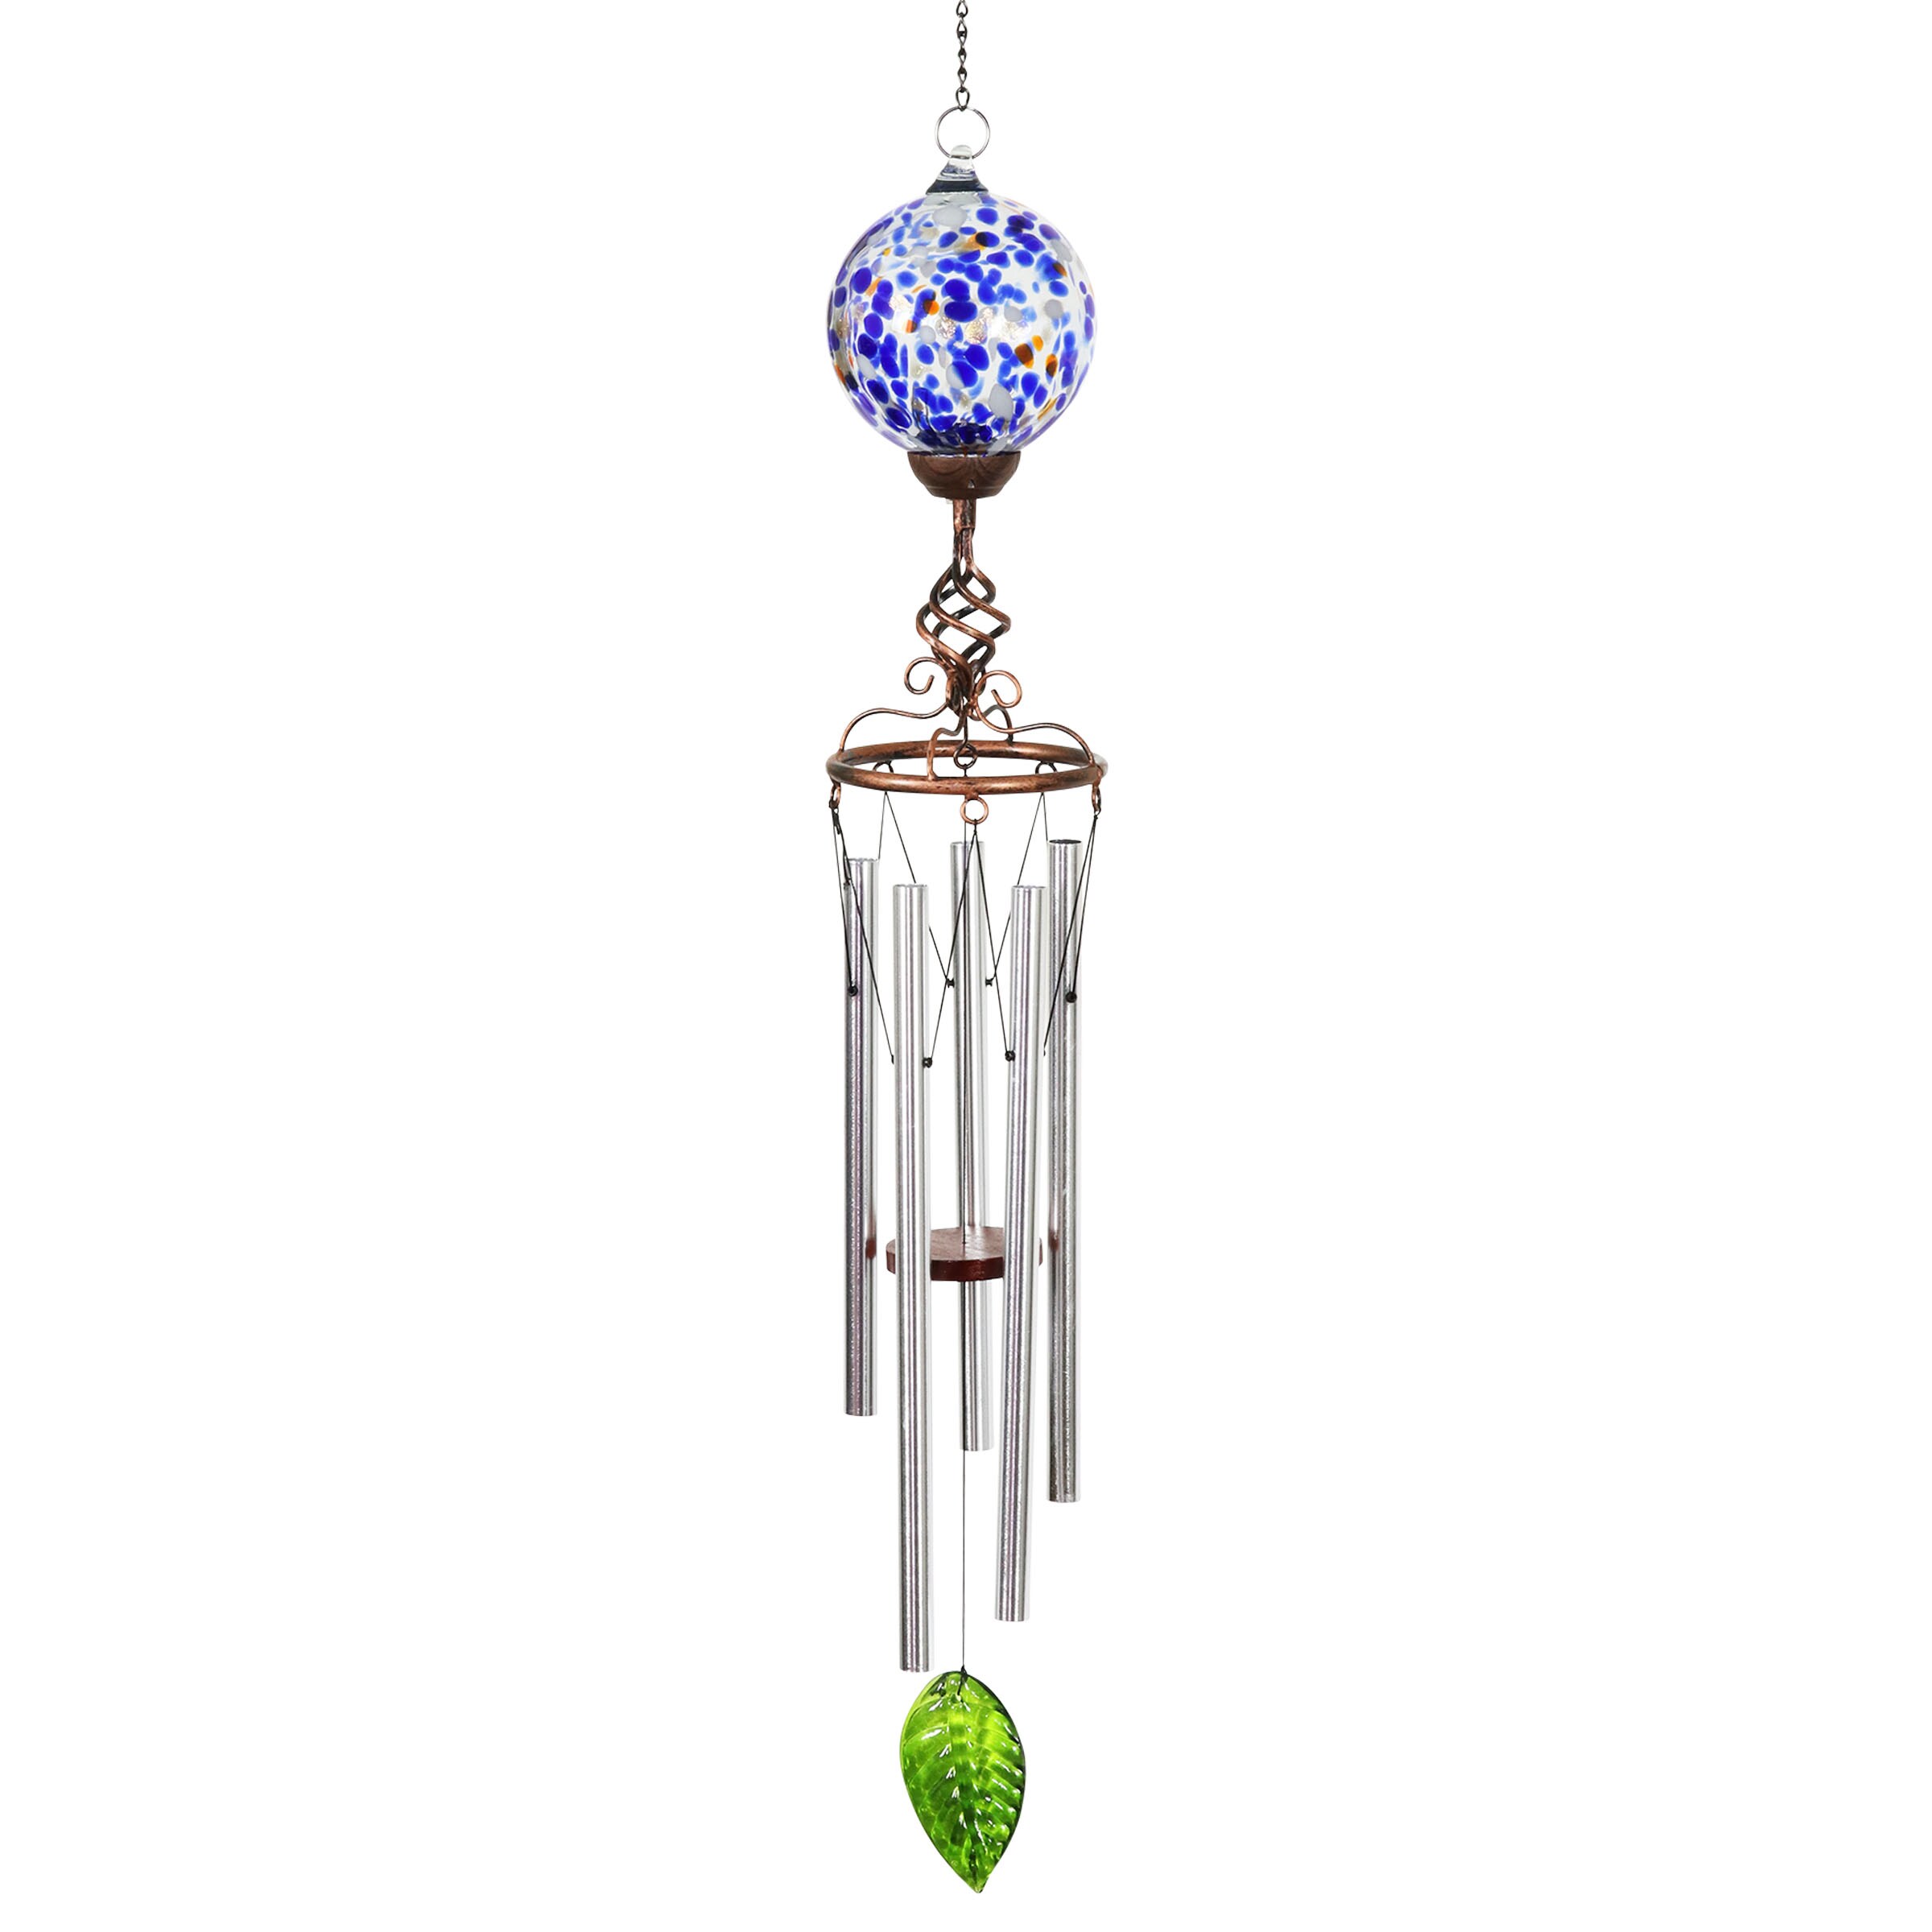 Handblown Glass Amber Exhart Solar Caged Glass Ball with Metal Finial Wind Chime Bronze Finished Finial Solar Powered Accent Light 5 W x 32 L 